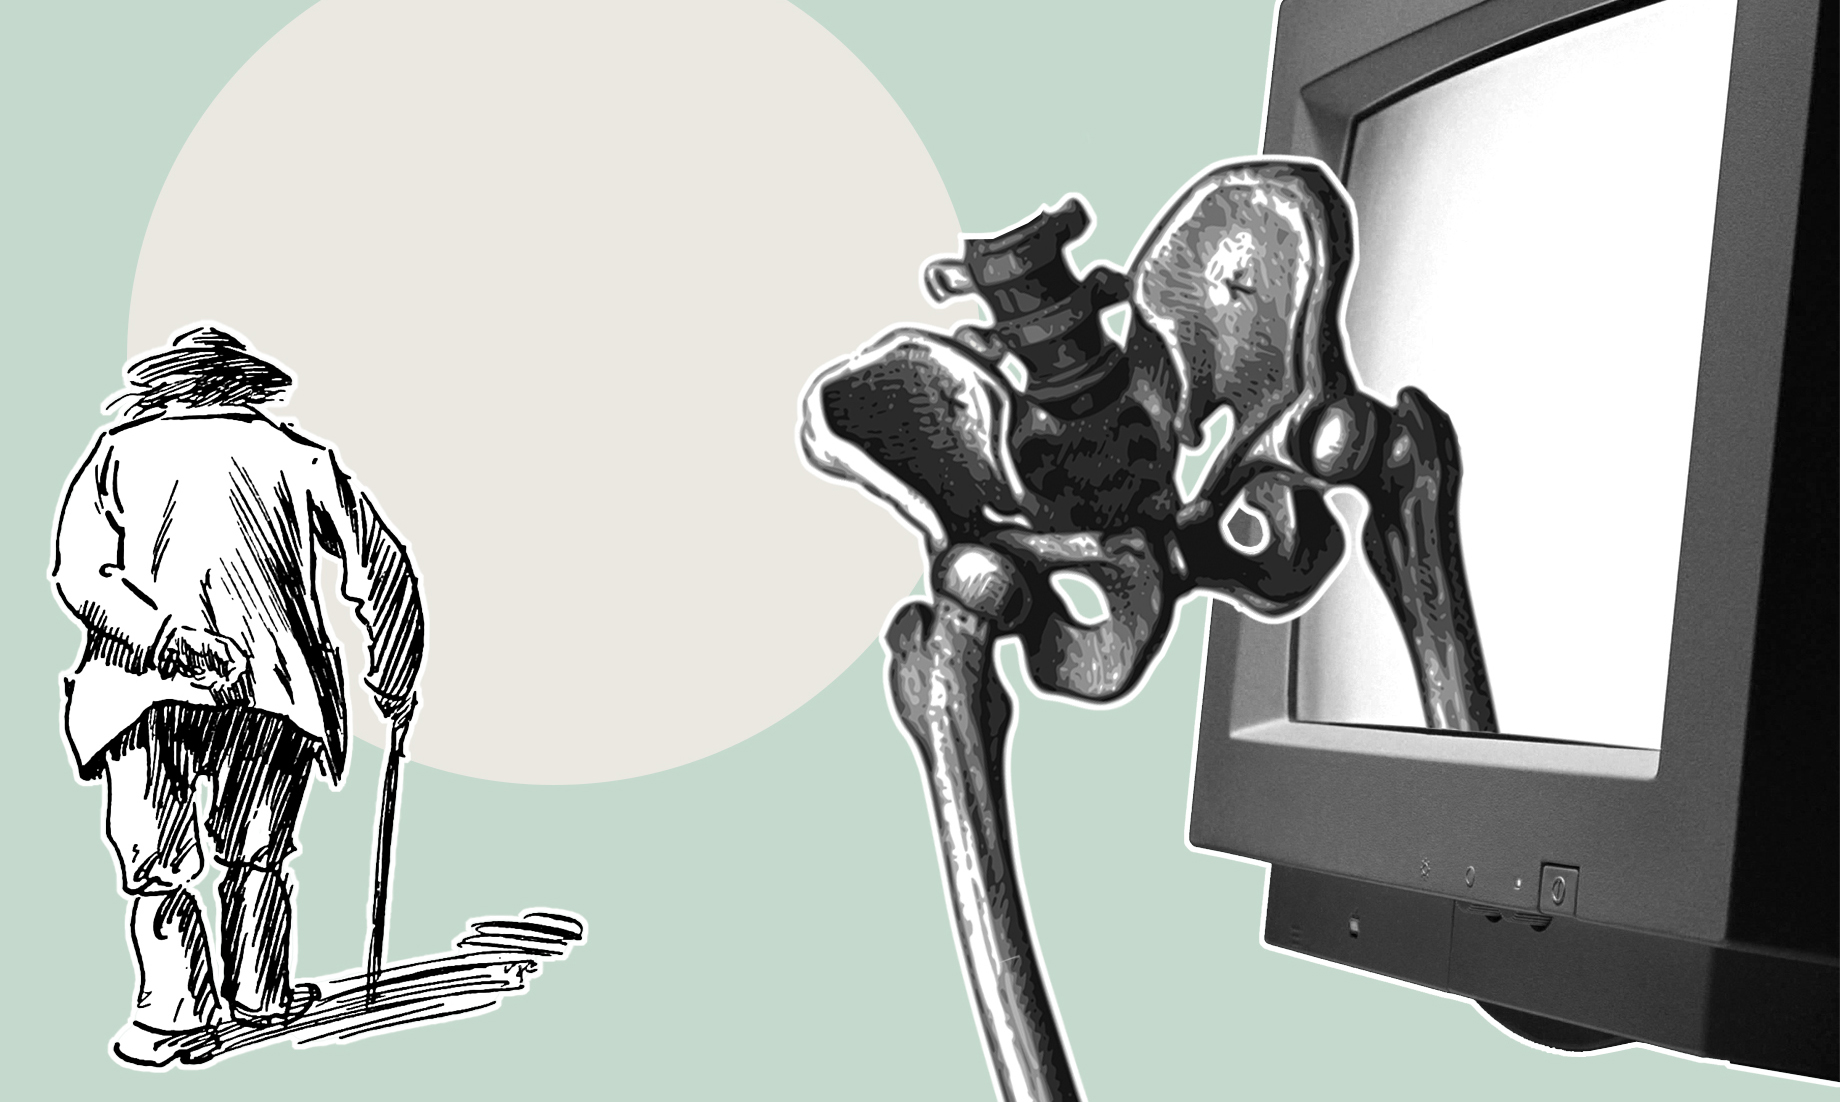 Illustration showing the silhouette of an elderly person, a skeleton part and a computer screen.